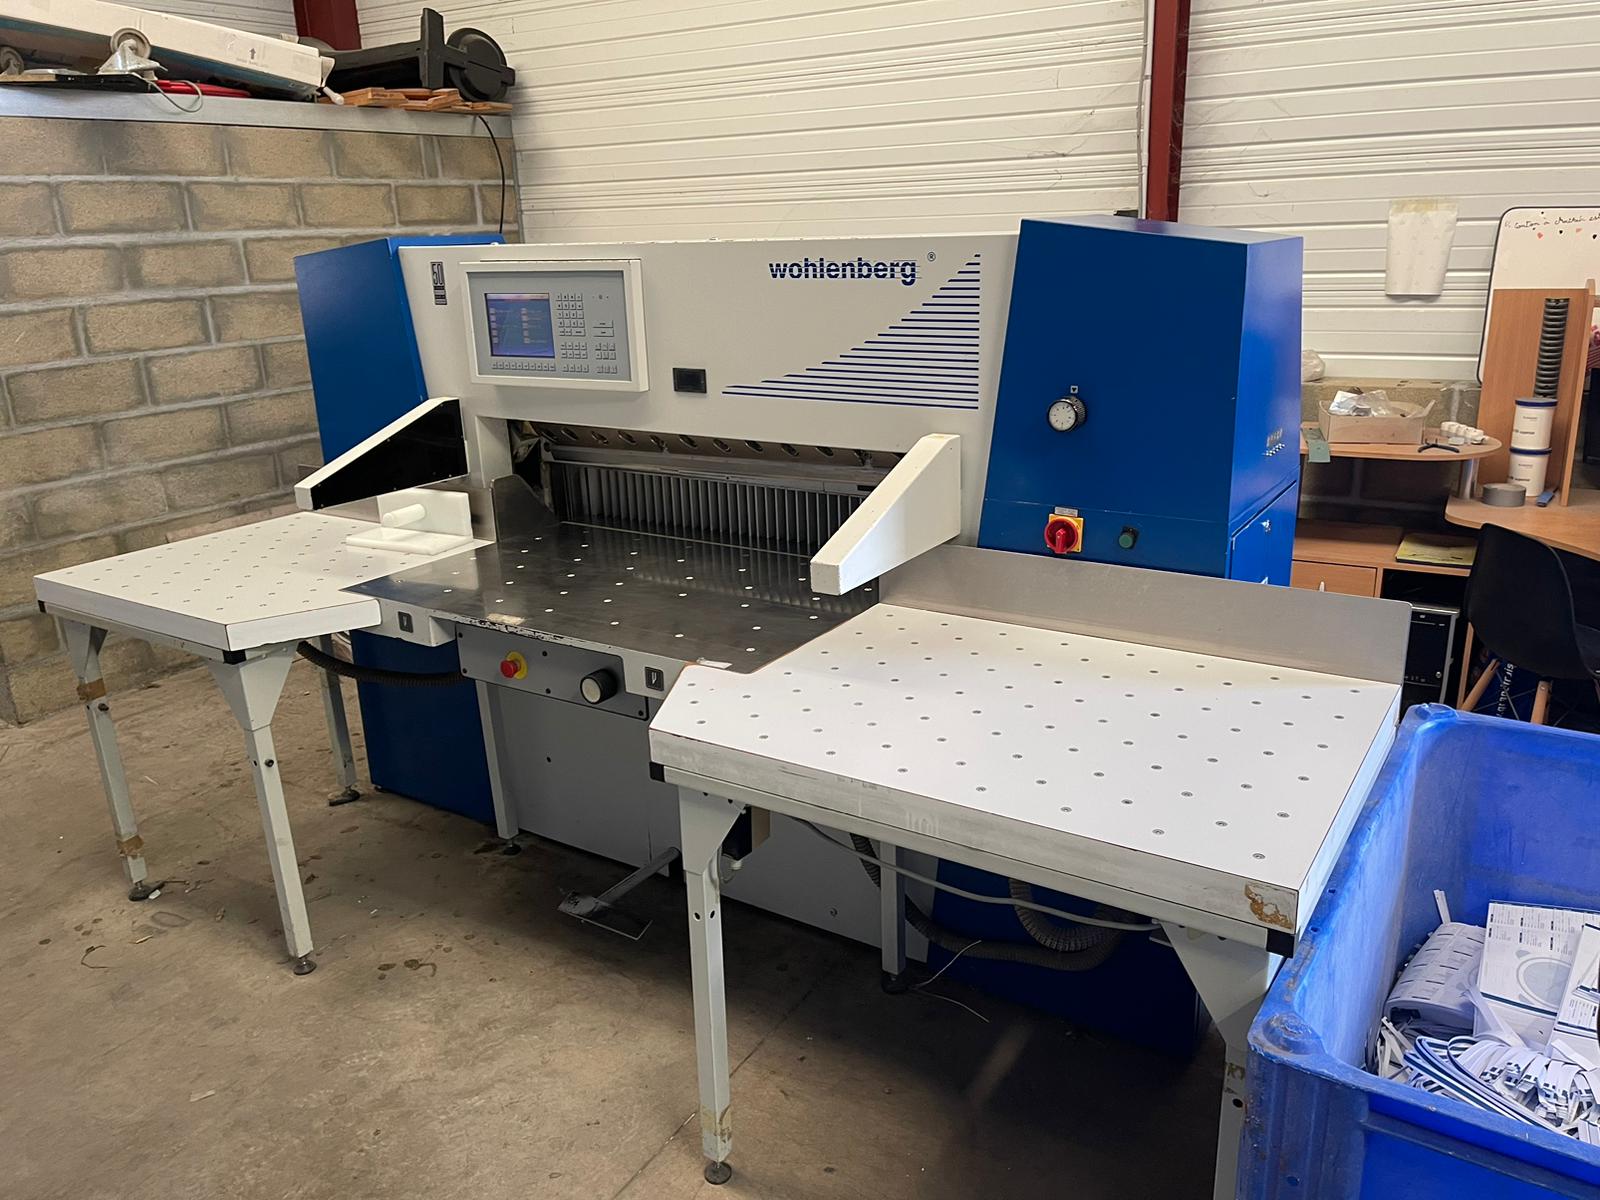 Wohlenberg 115 Guillotines Used Machinery for sale